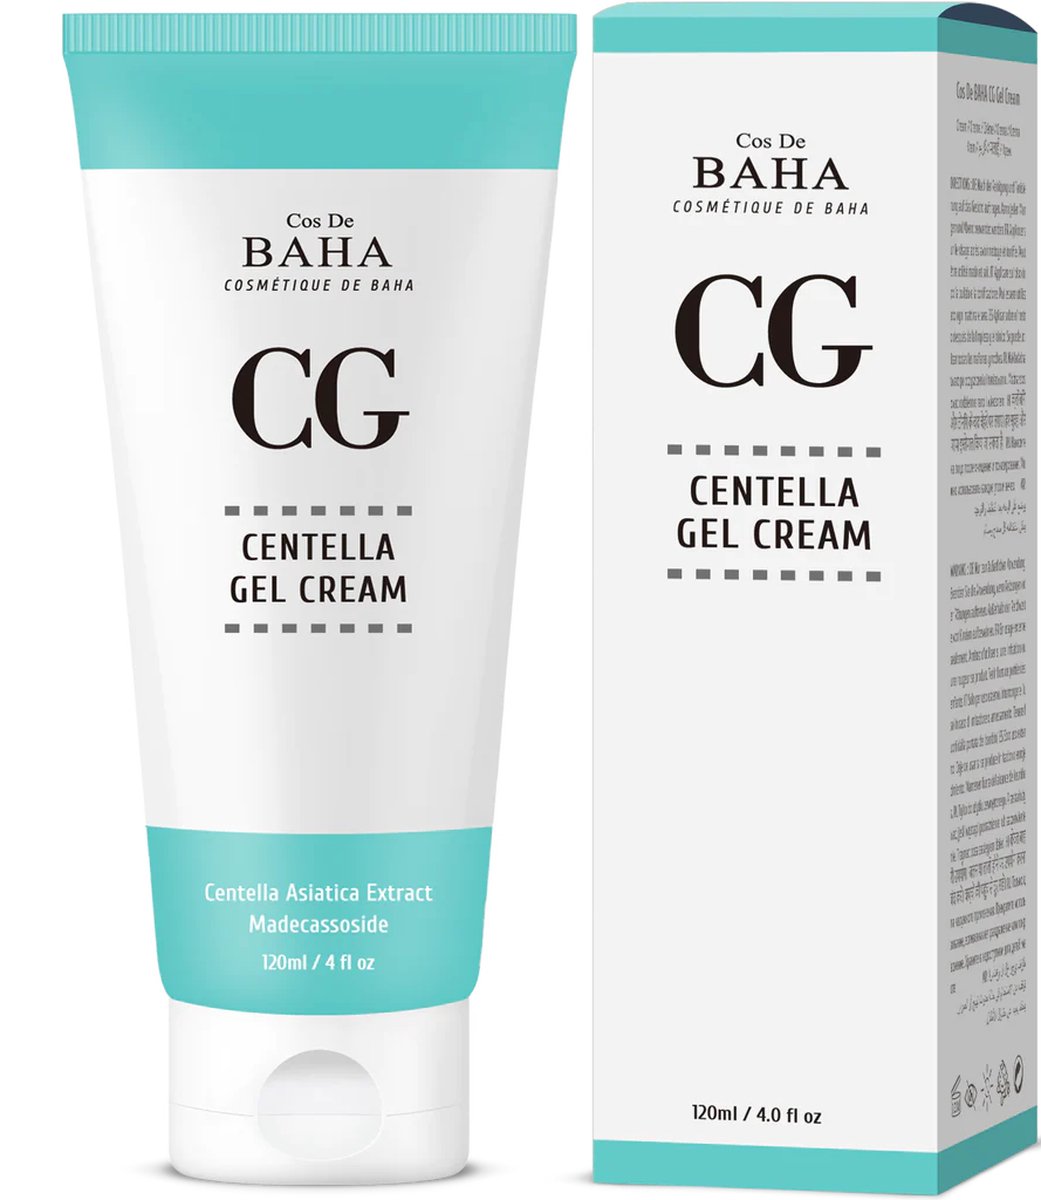 Cos De BAHA Centella Asiatica Soothing Calming Cream - CG - Large Size 120ml - Face/Neck - Cica Facial Gel Cream Lightweight Hydrate Boost Smooth, Daily Face Moisturizer, Silicone-Free, Fragrance-Free, Lotion Korean K Beauty